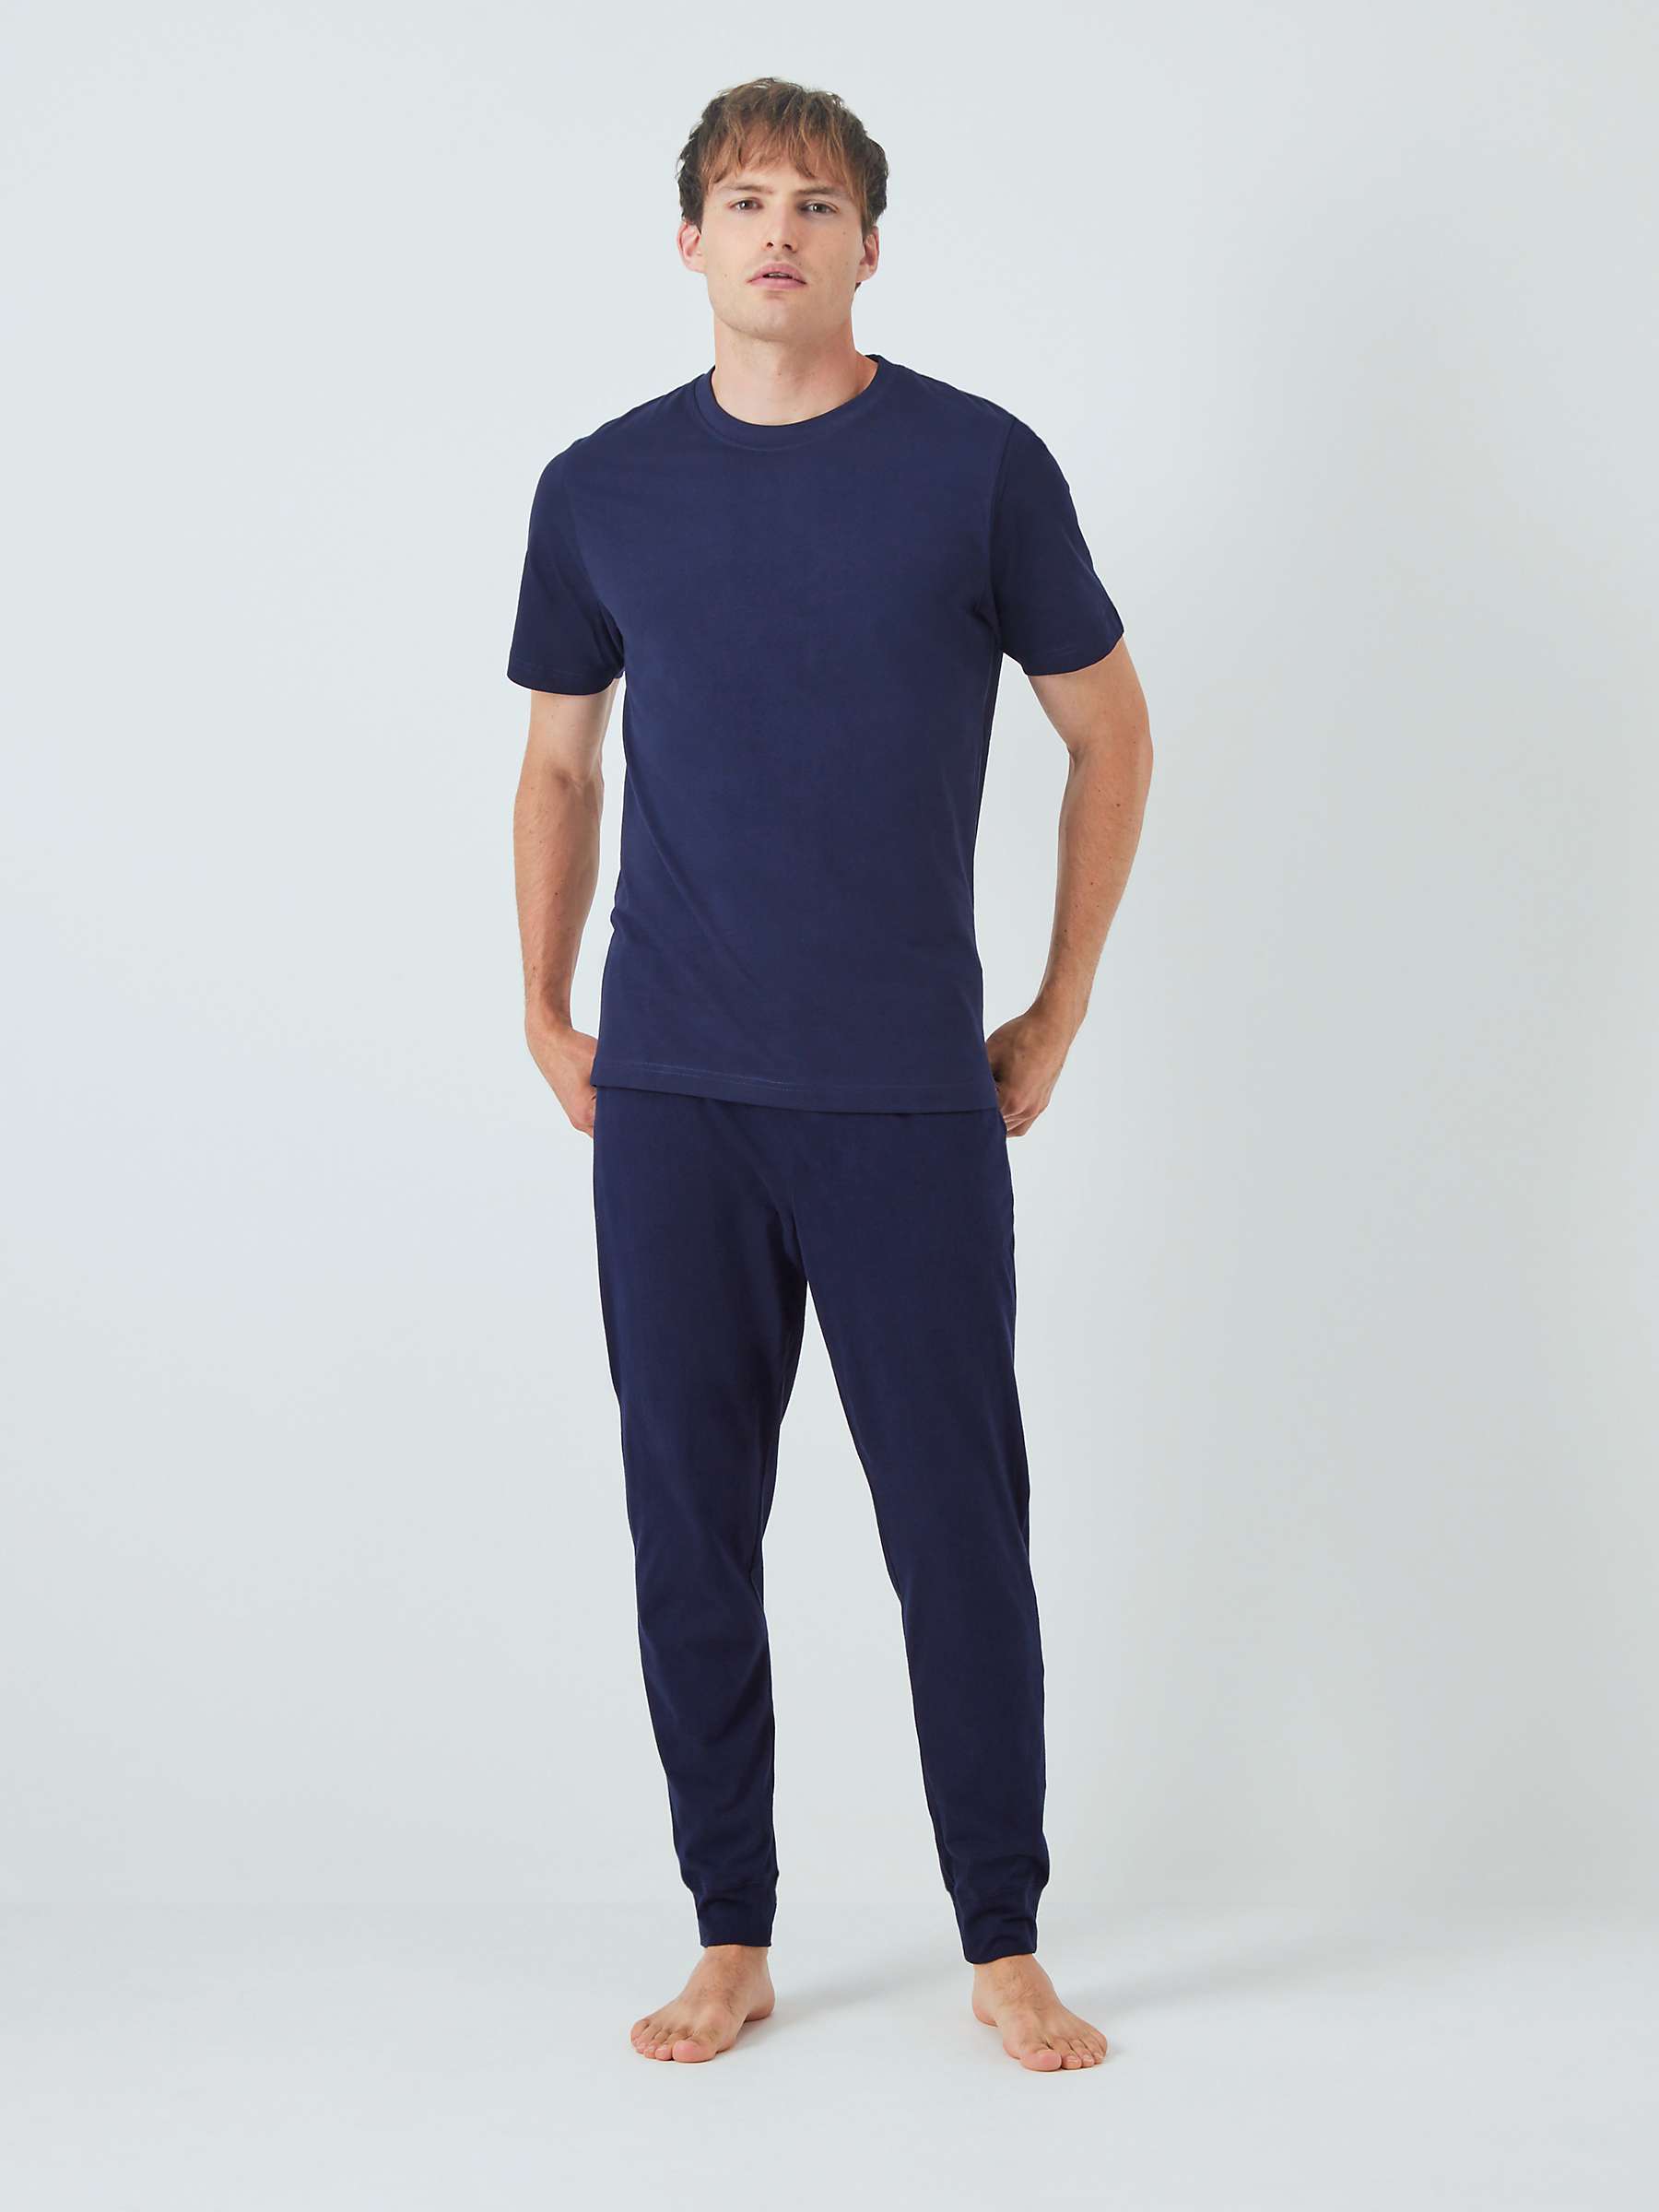 Buy John Lewis ANYDAY Cotton Jersey Joggers, Pack of 2, Navy/Grey Online at johnlewis.com